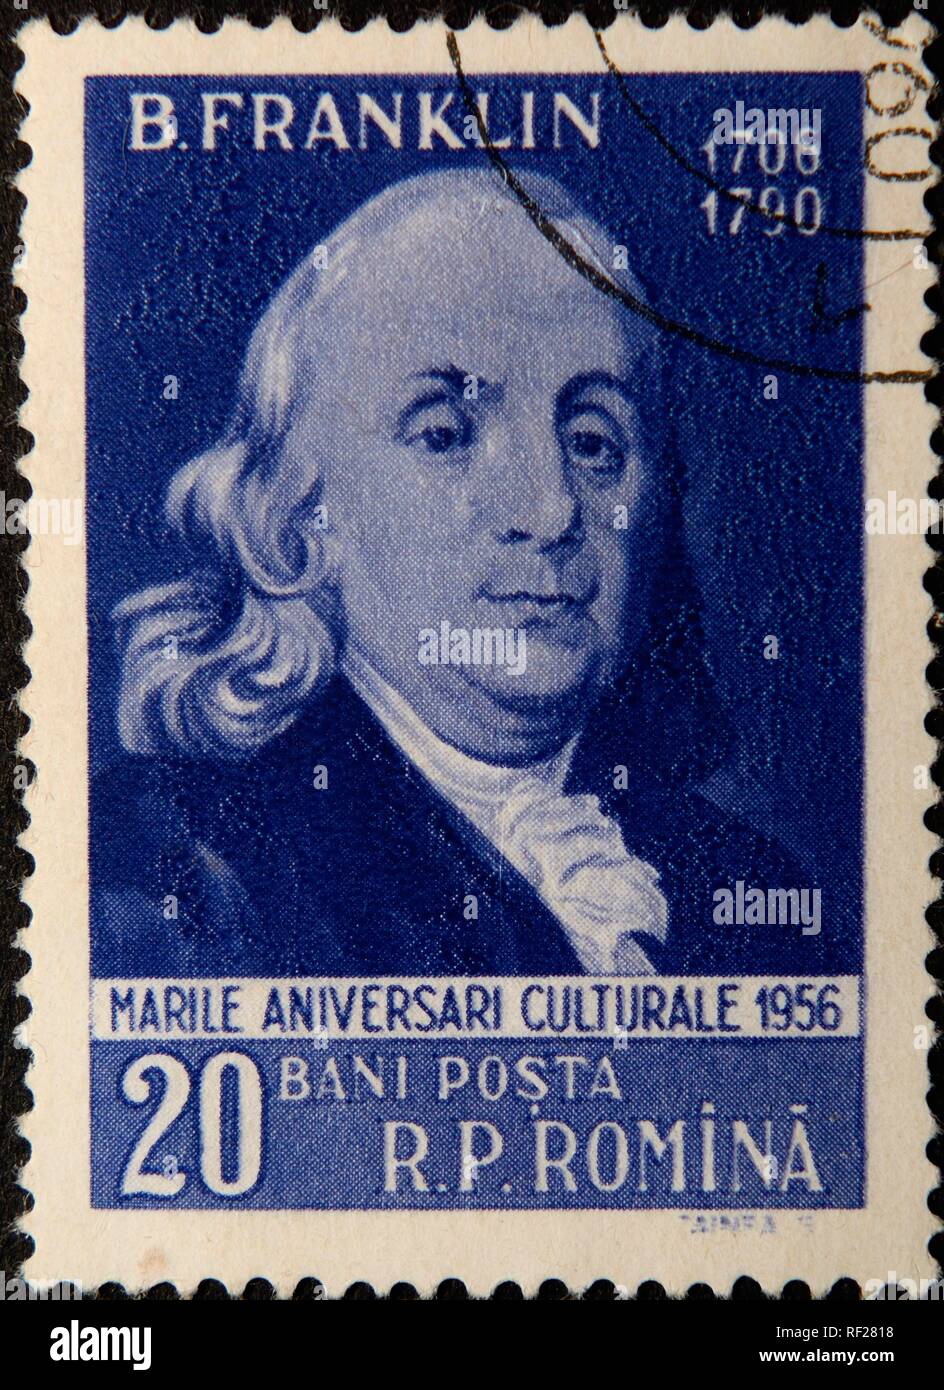 Benjamin Franklin, a North American printer, publisher, writer, scientist, inventor and statesman, portrait on a Romanian stamp Stock Photo